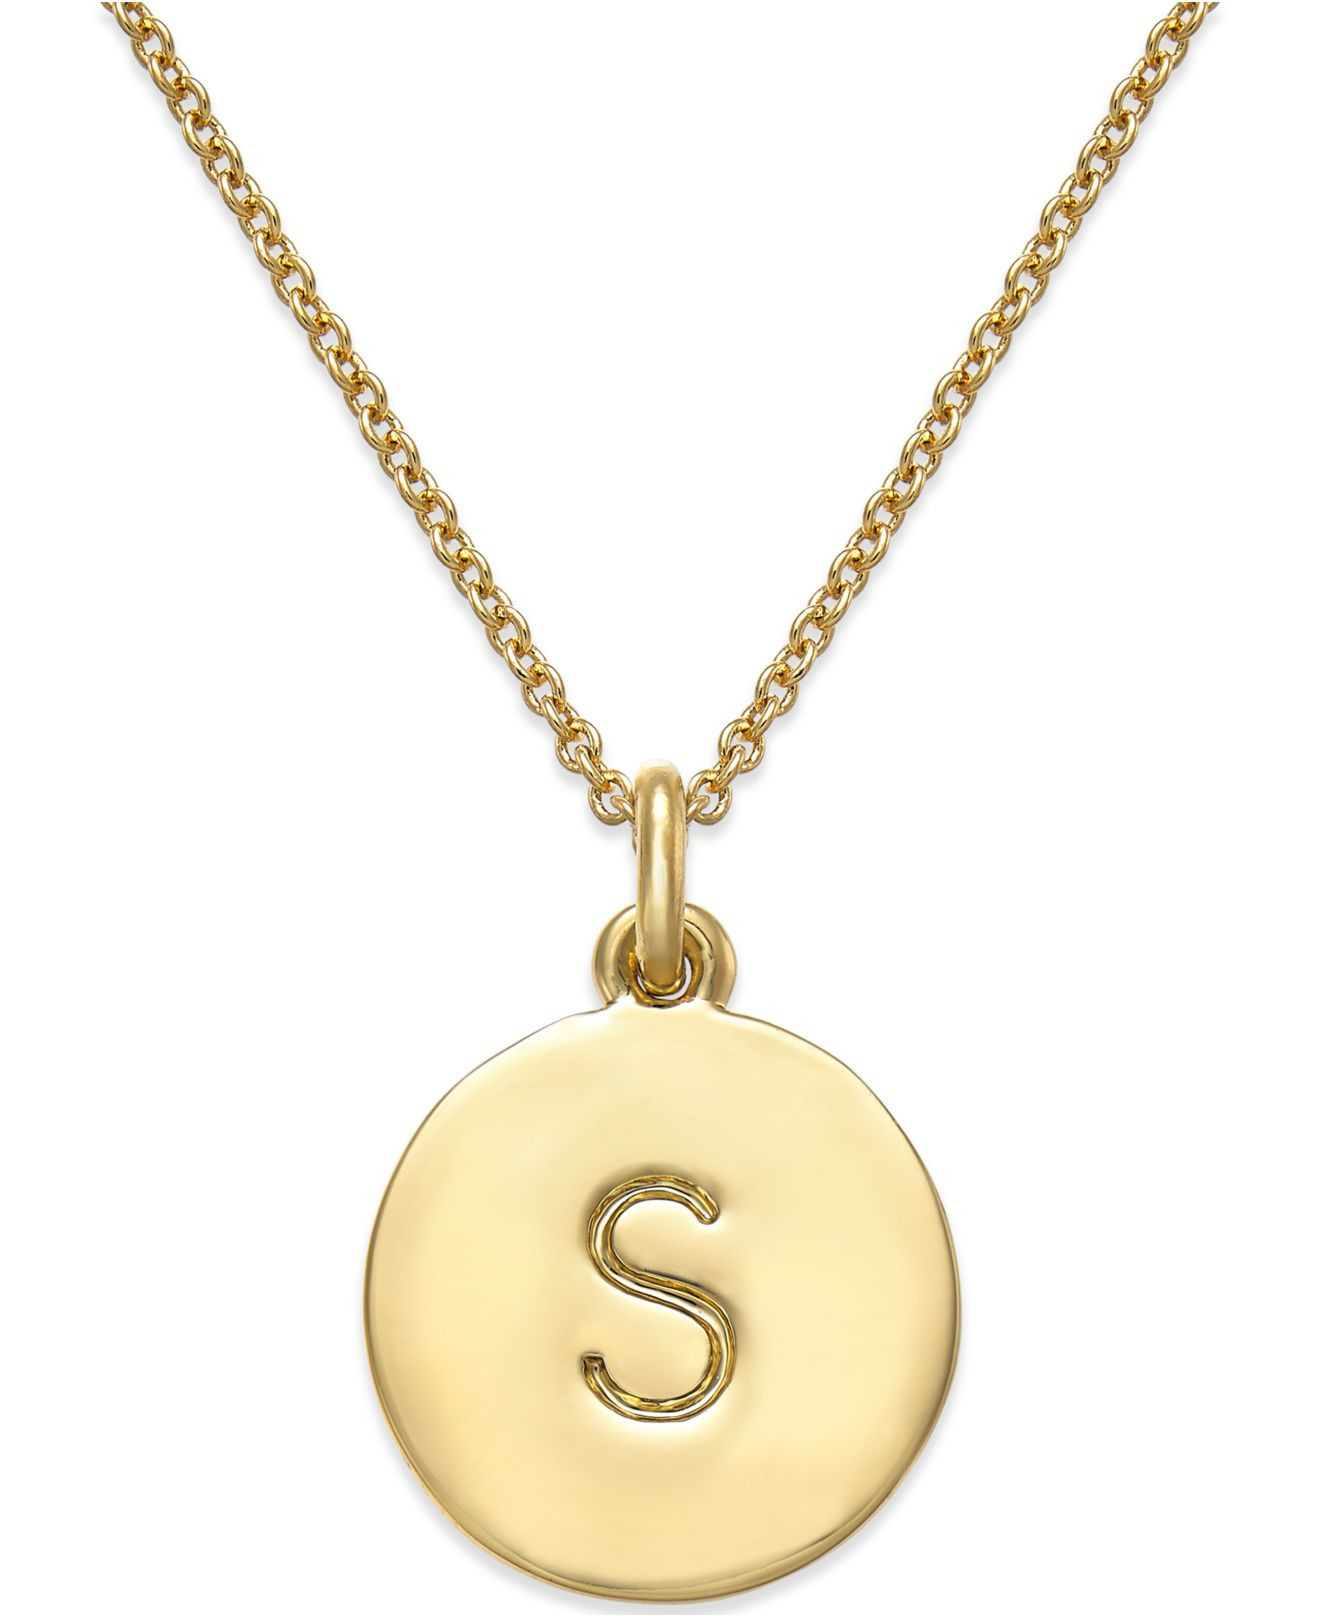 Kate Spade Necklaces
 Kate Spade 12K Gold Plated Initials Pendant Necklace in